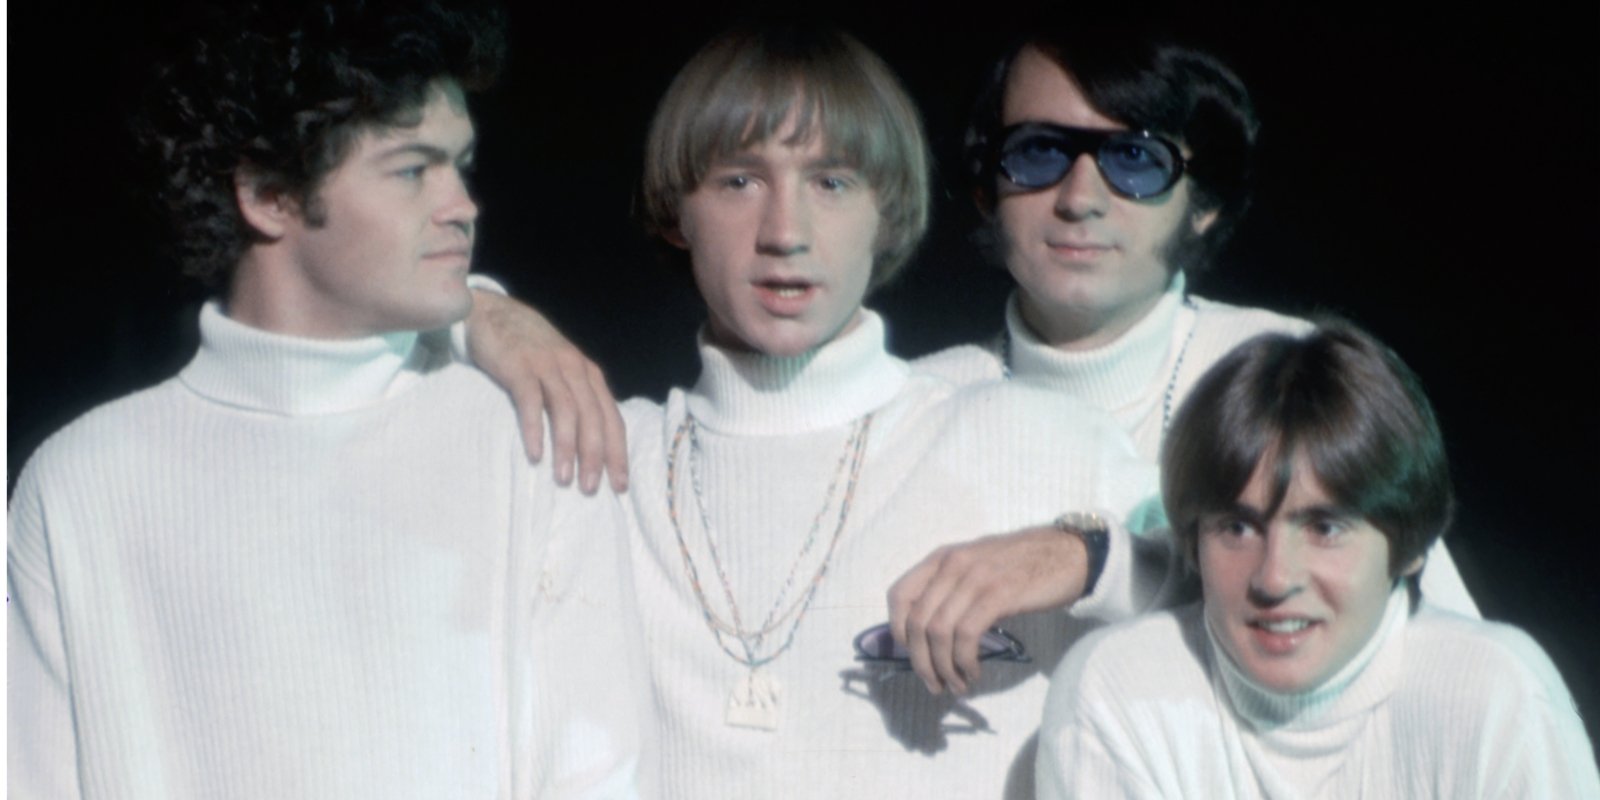 Mickey Dolenz, Peter Tork, Mike Nesmith, and Davy Jones of The Monkees.